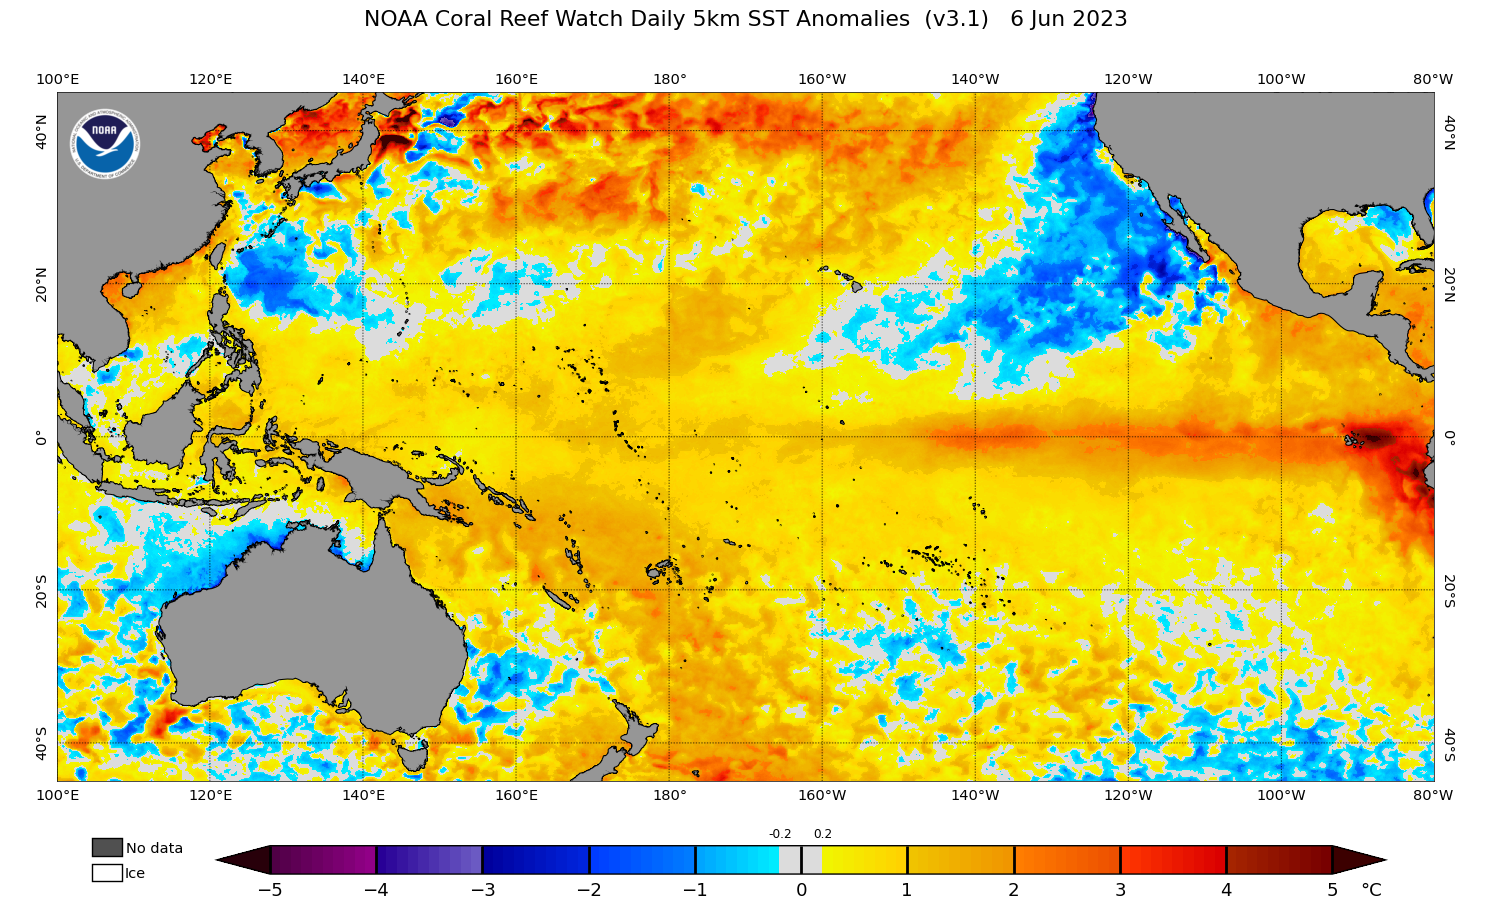 2023 Jun 06 SST Anomaly map for the Pacific Ocean